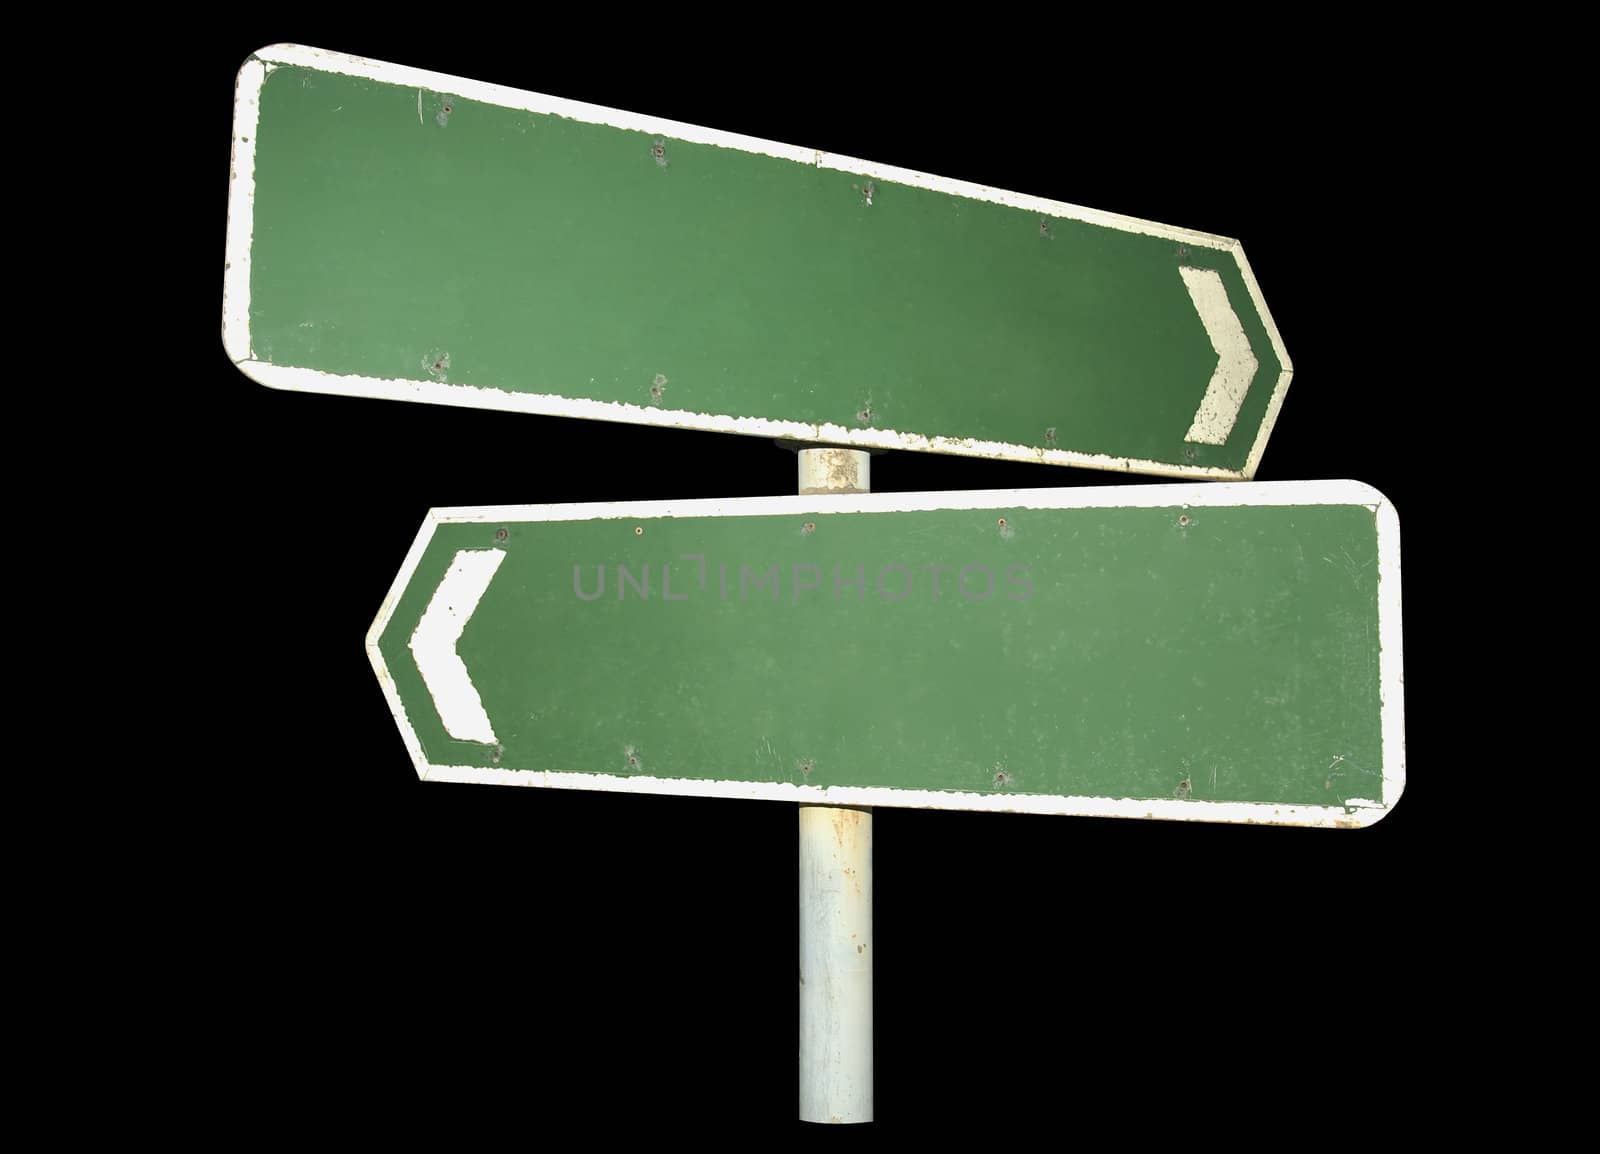 Grungy green signs (Clipping path included) by Bateleur